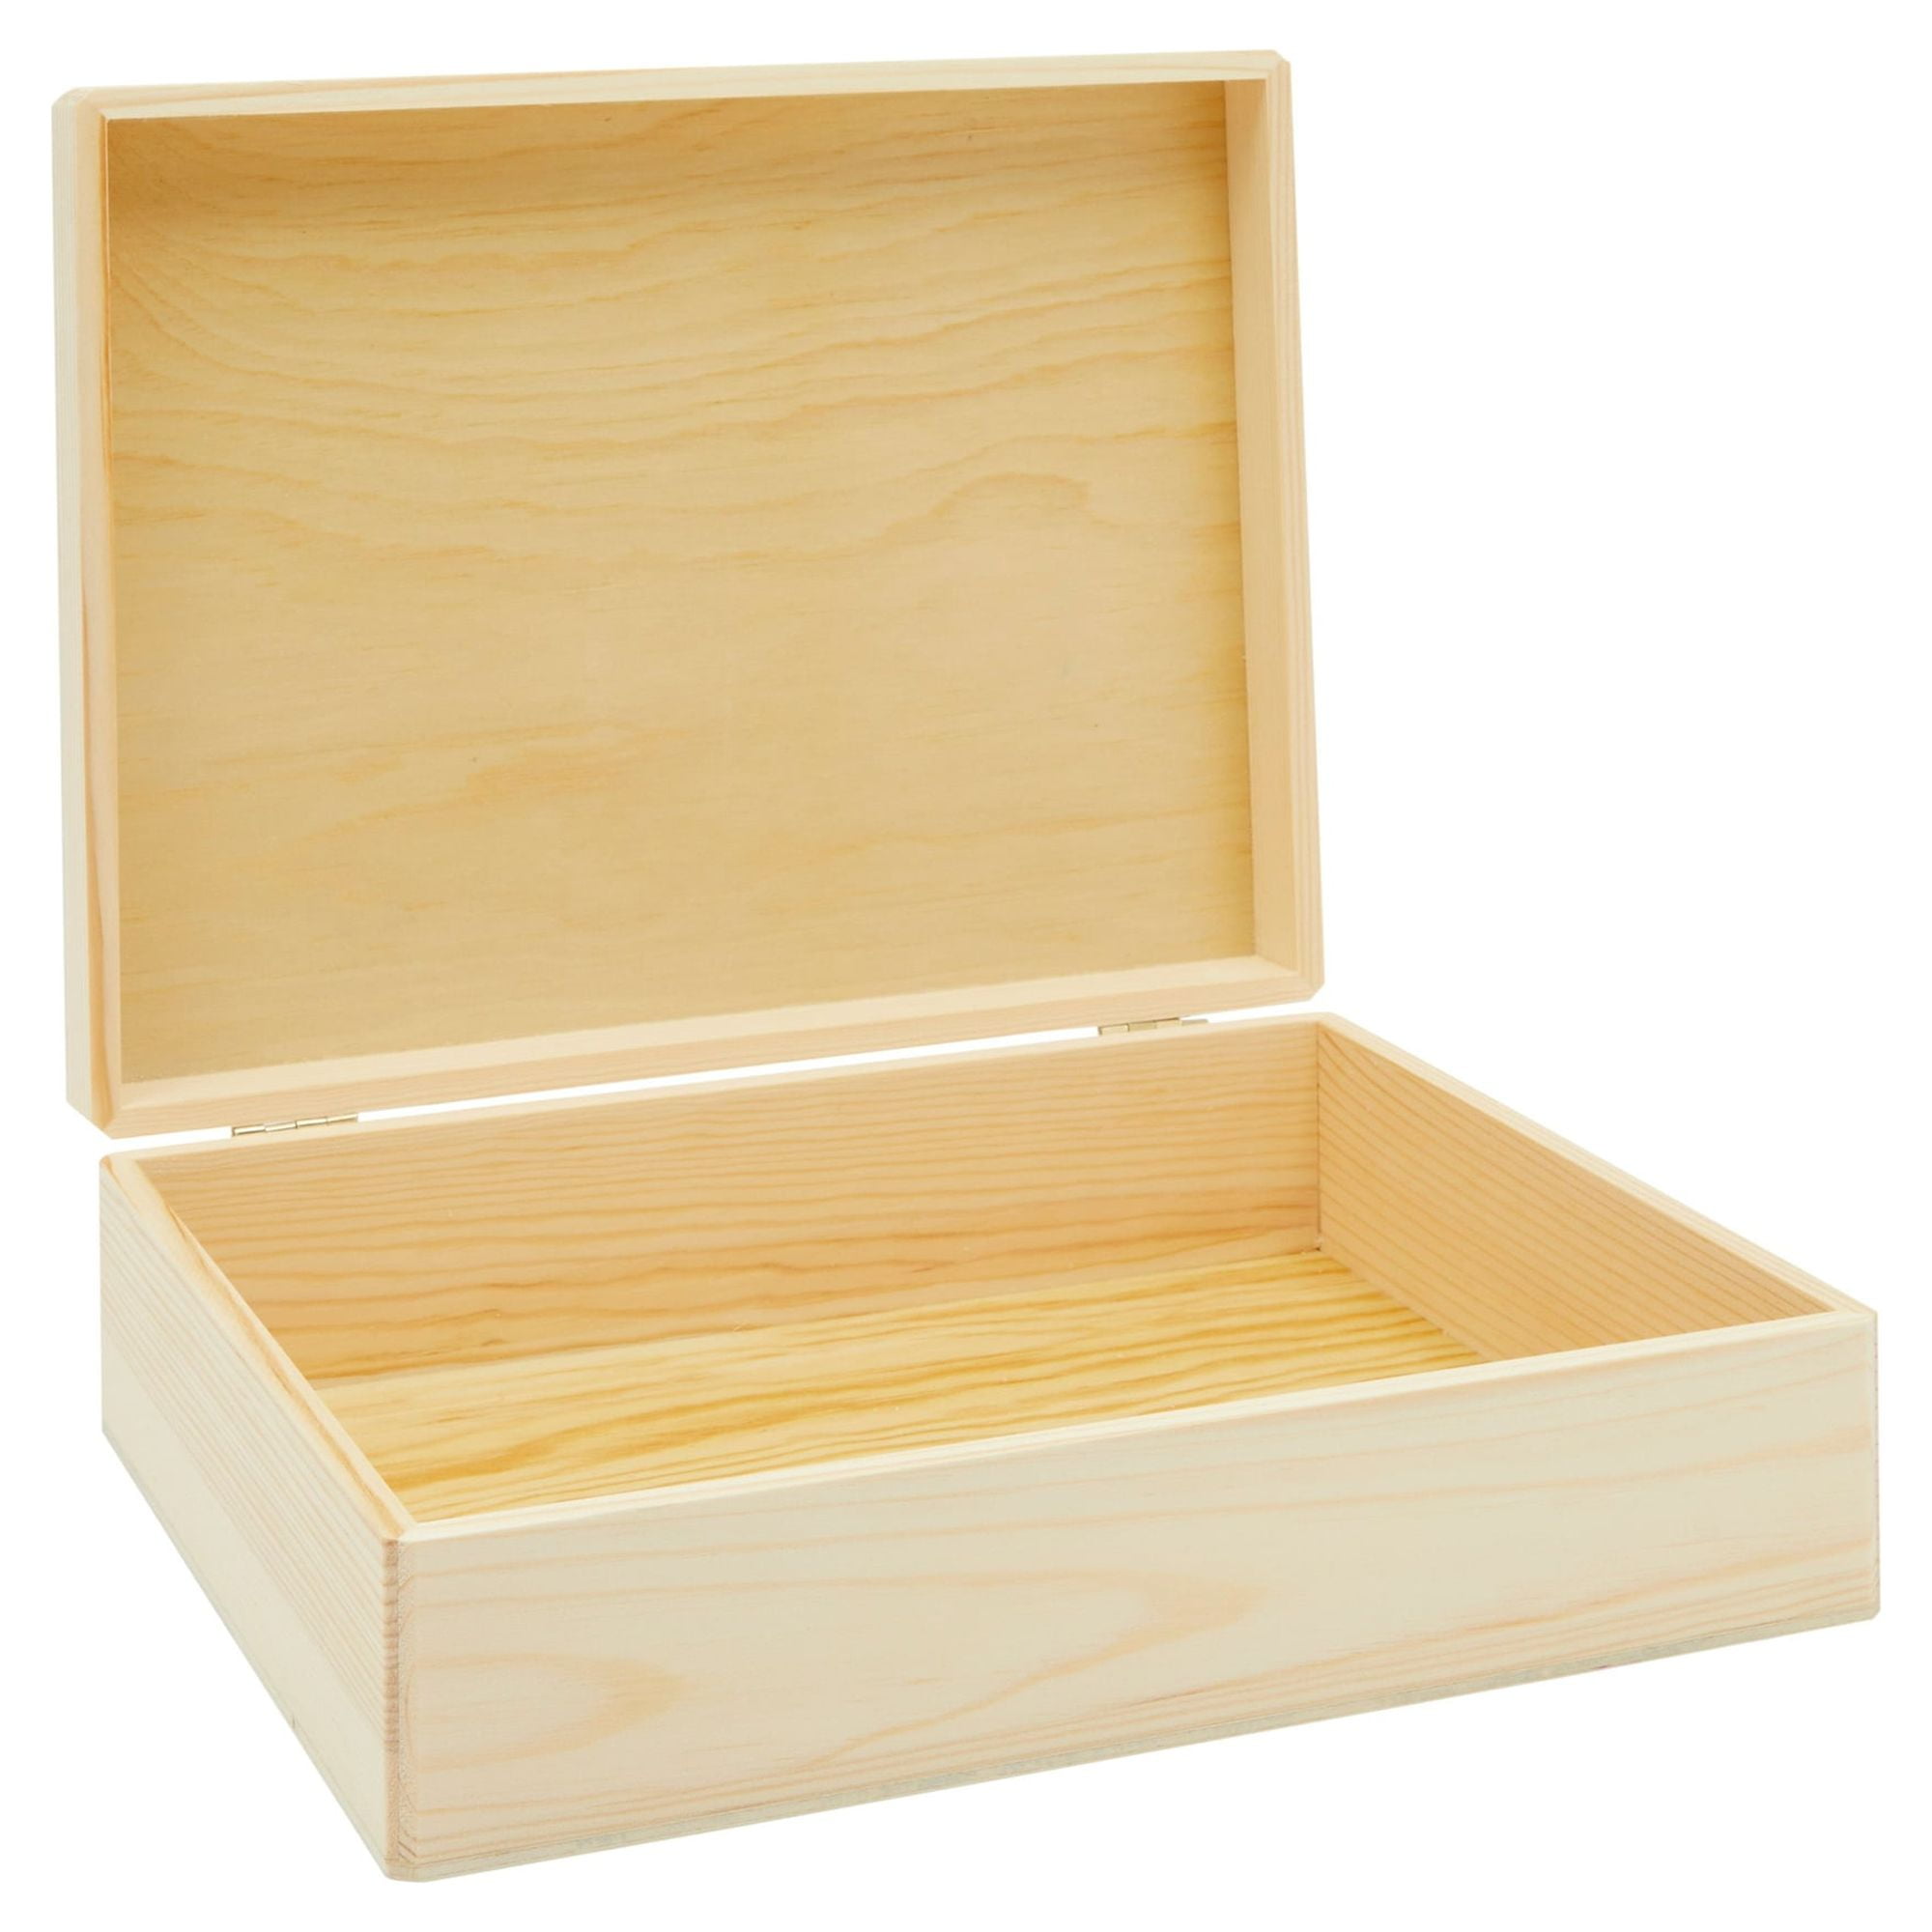 Wood Box with Lid Wooden Glasses Box Trinket Box Wooden Storage